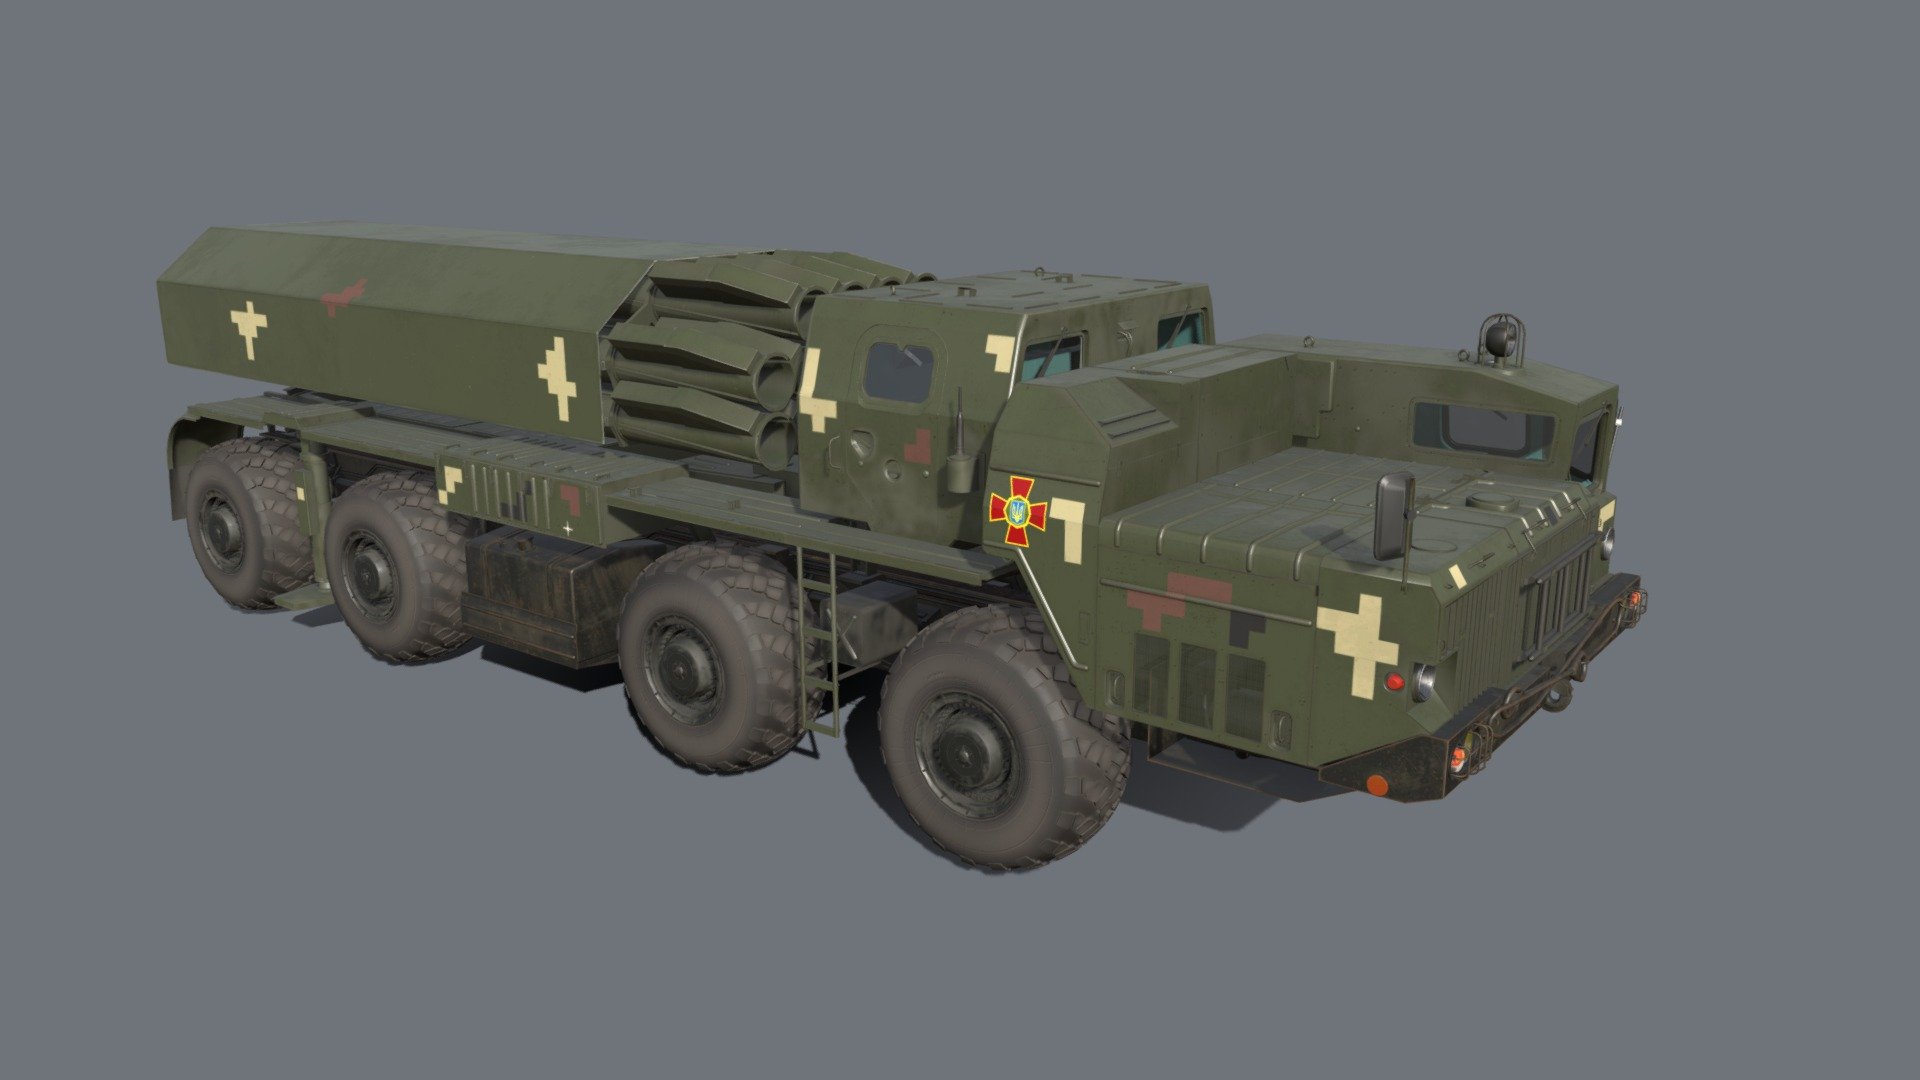 This model is a further modernization of the Smerch MLRS, which uses a new longer-range adjustable ammunition.
It was first publicly presented at the Independence Parade in Kyiv in 2018 3d model